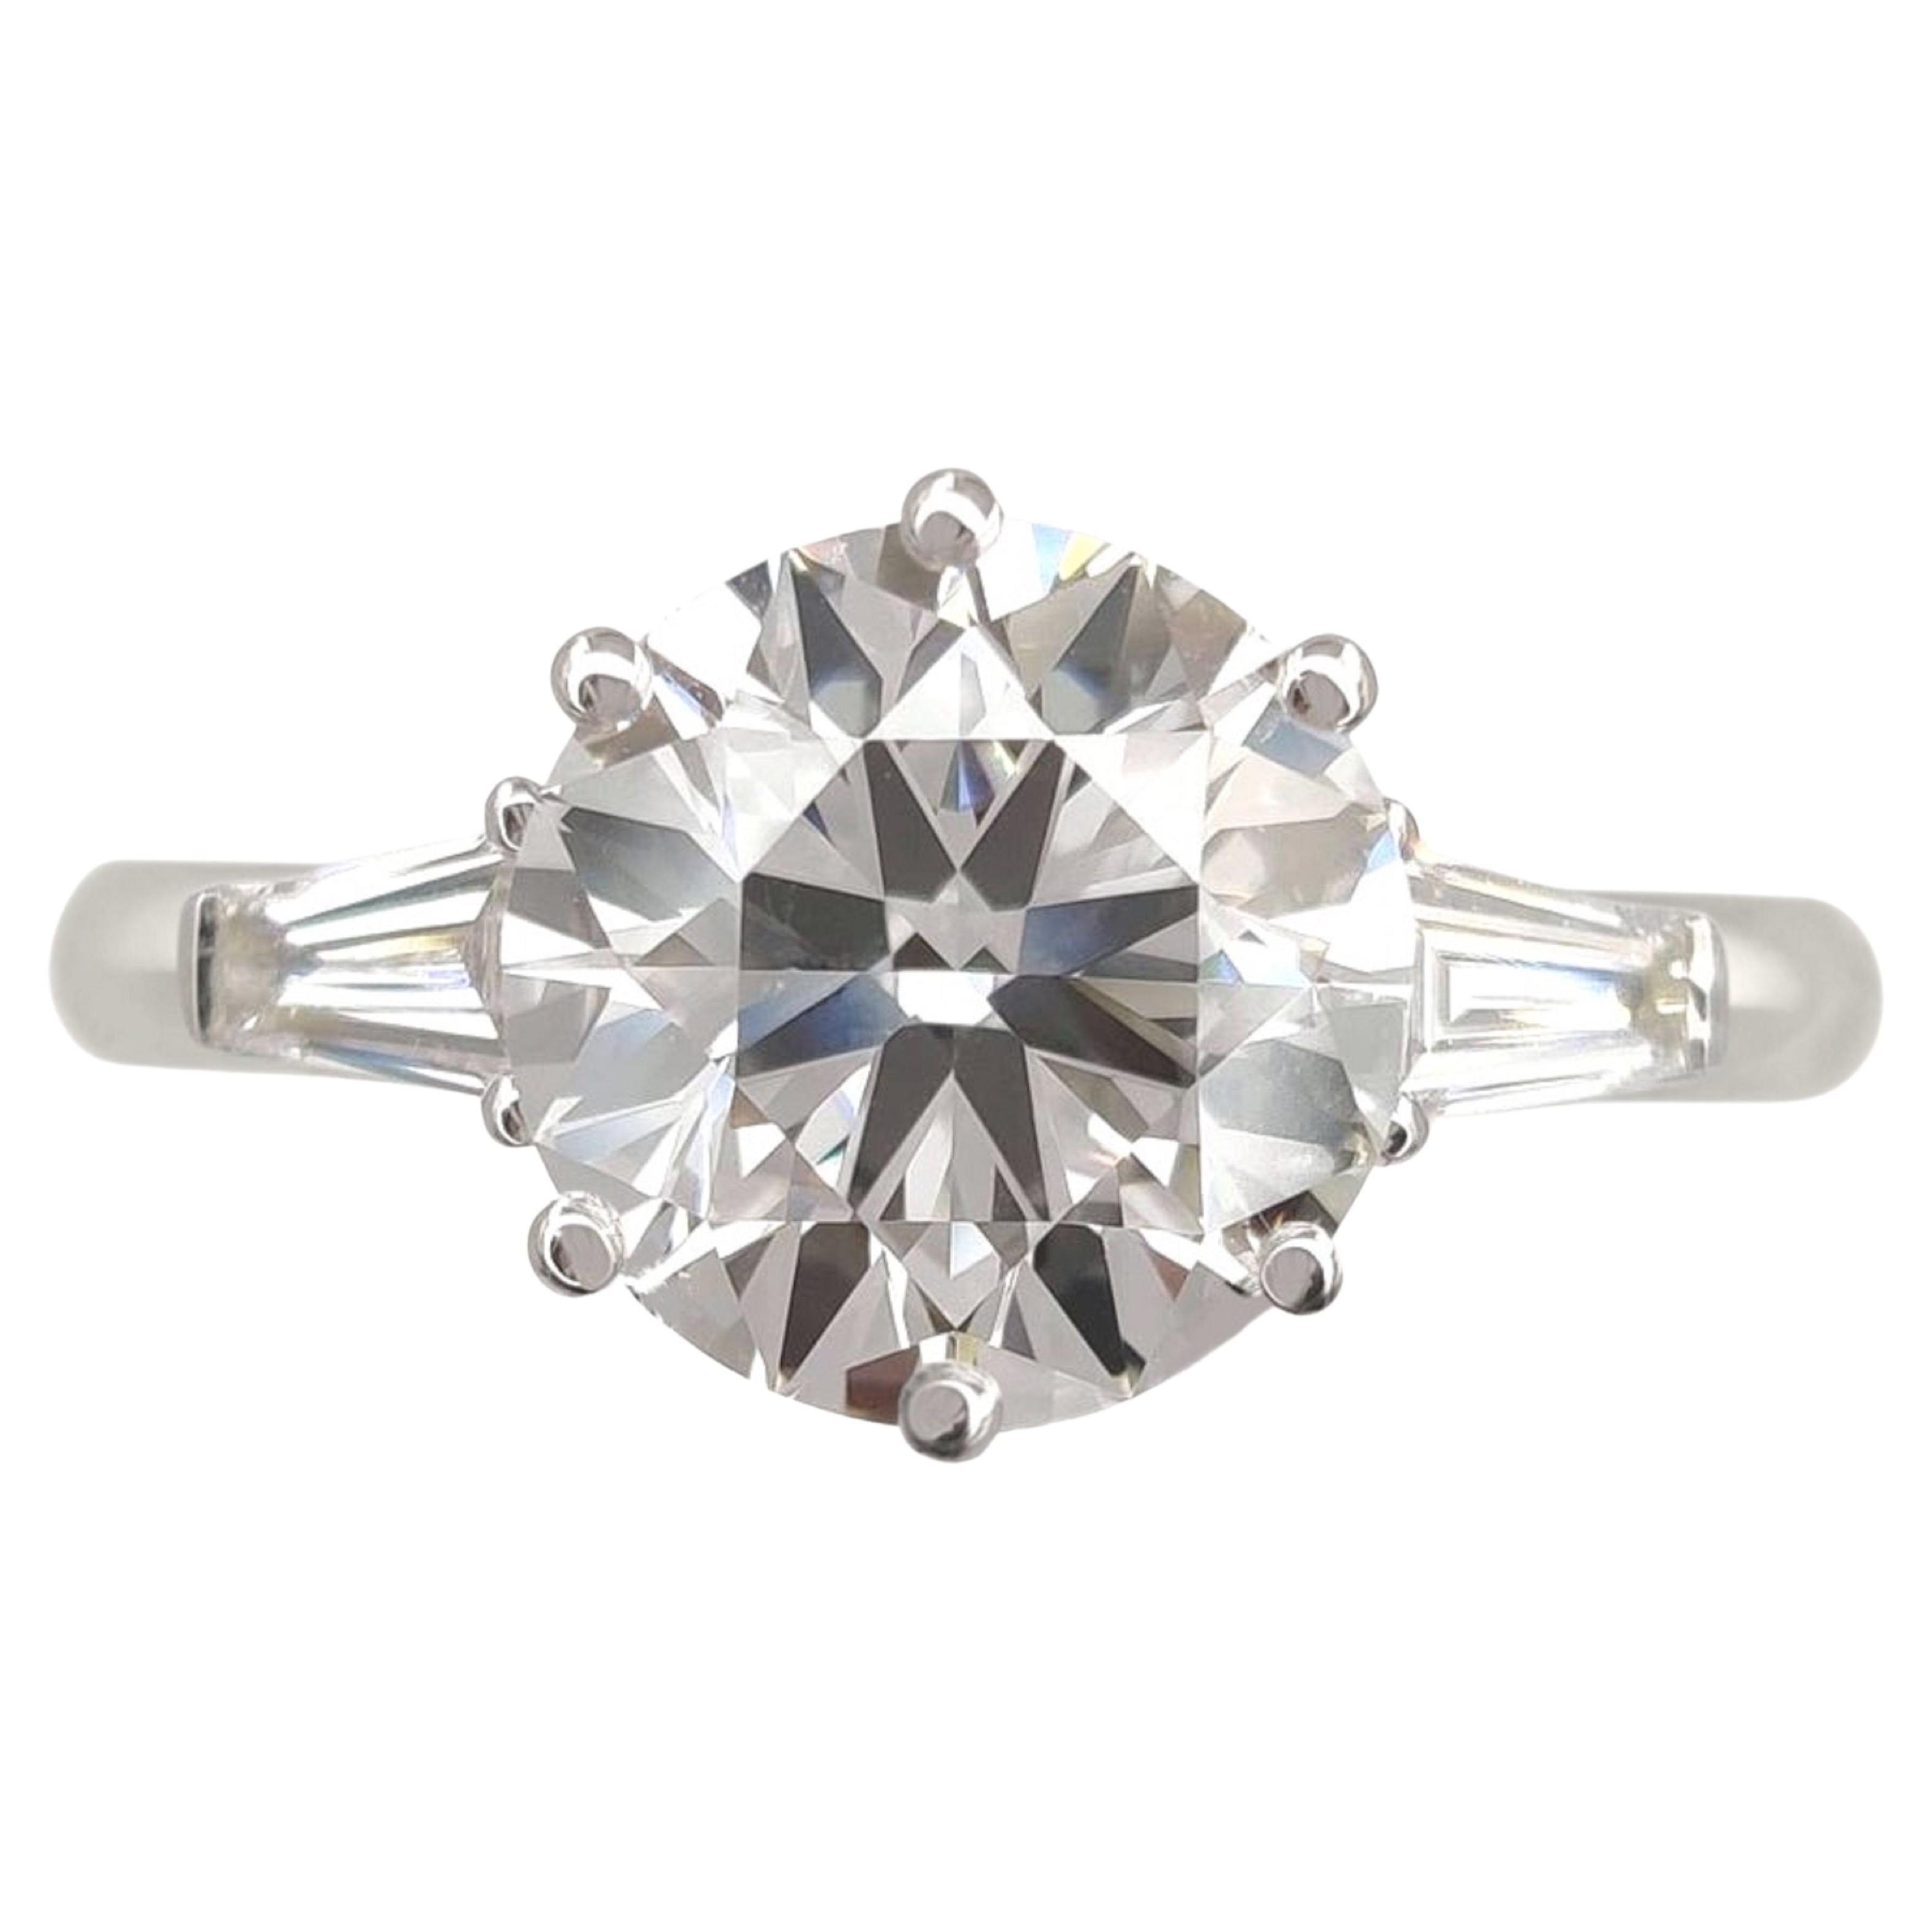 Exceptional GIA Certified 3 Carat Round Brilliant Cut Diamond Solitaire Ring